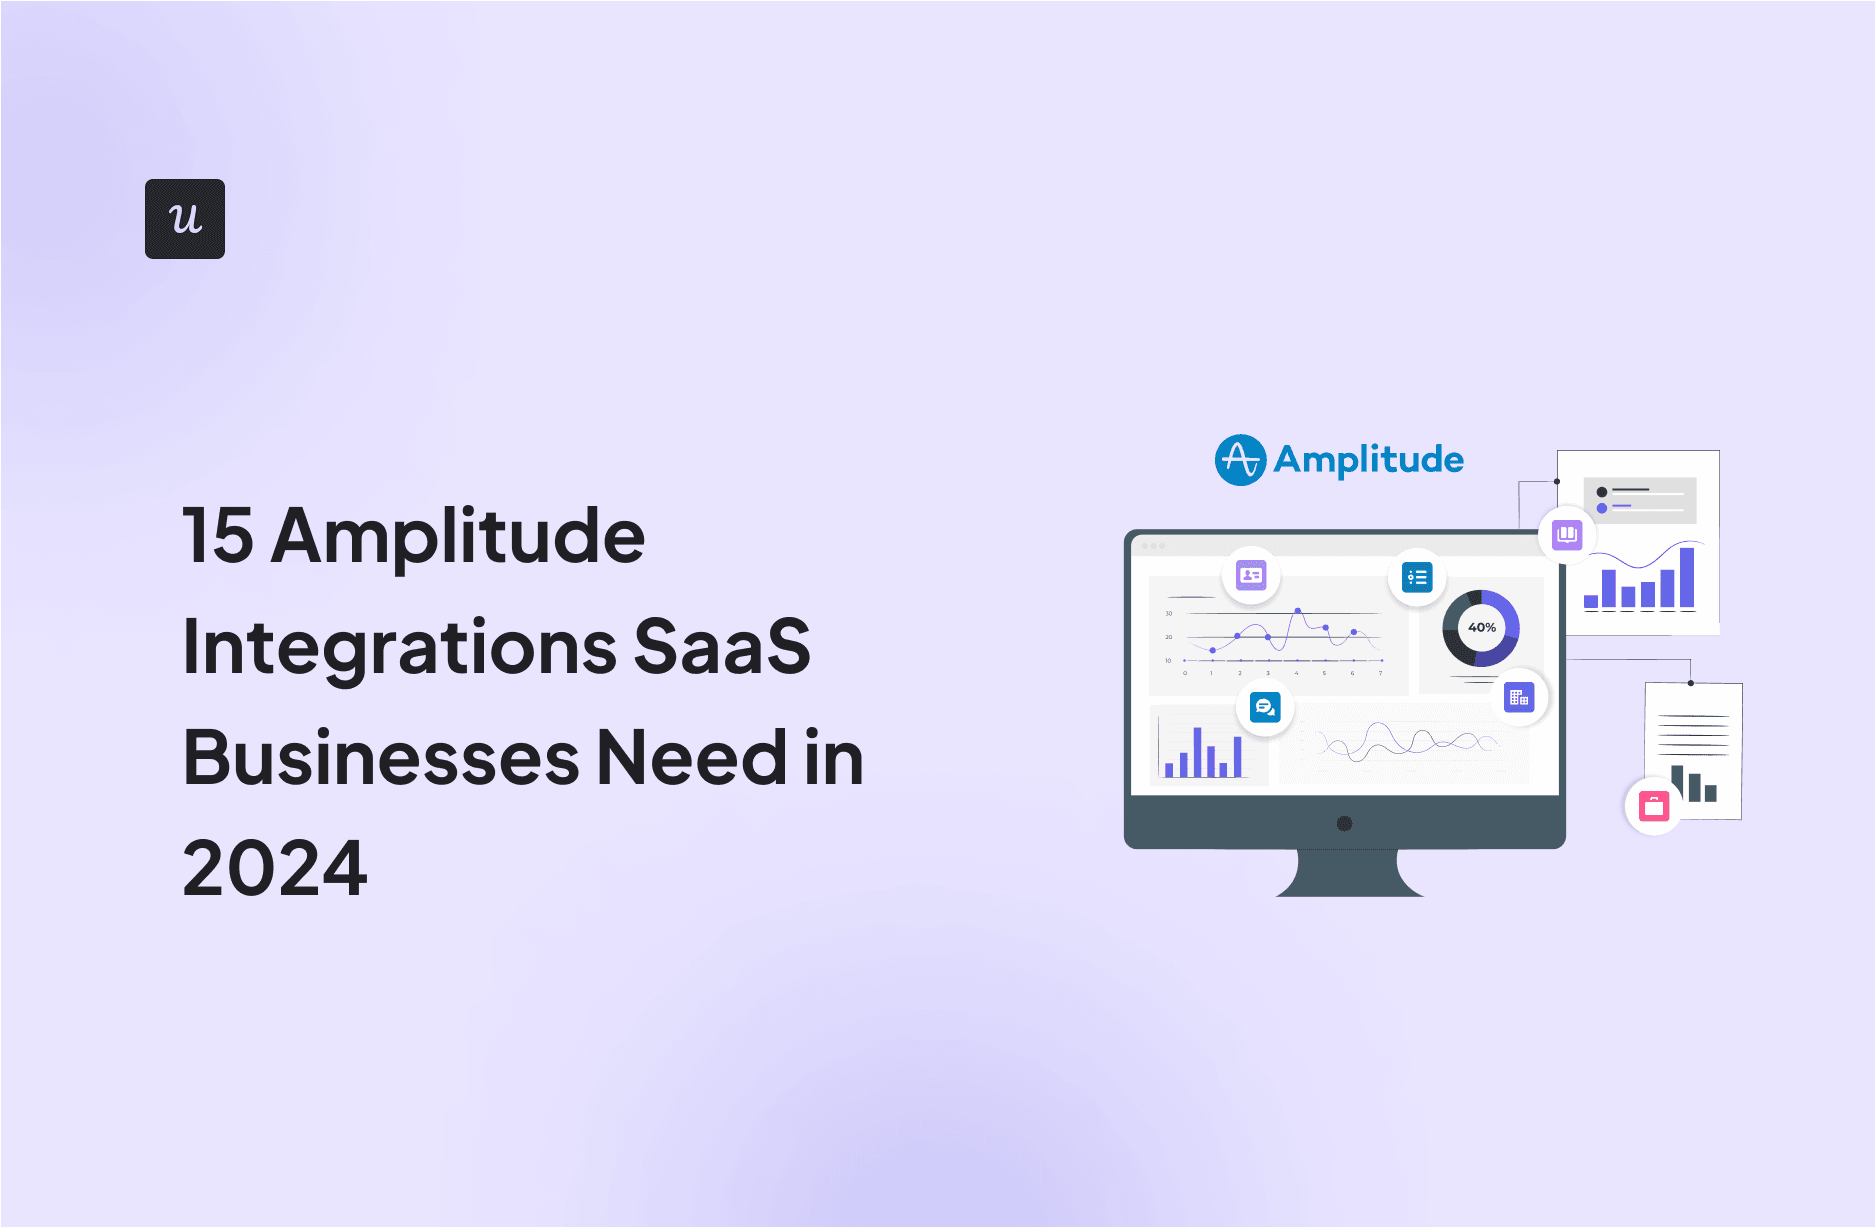 15 Amplitude Integrations SaaS Businesses Need in 2024 cover